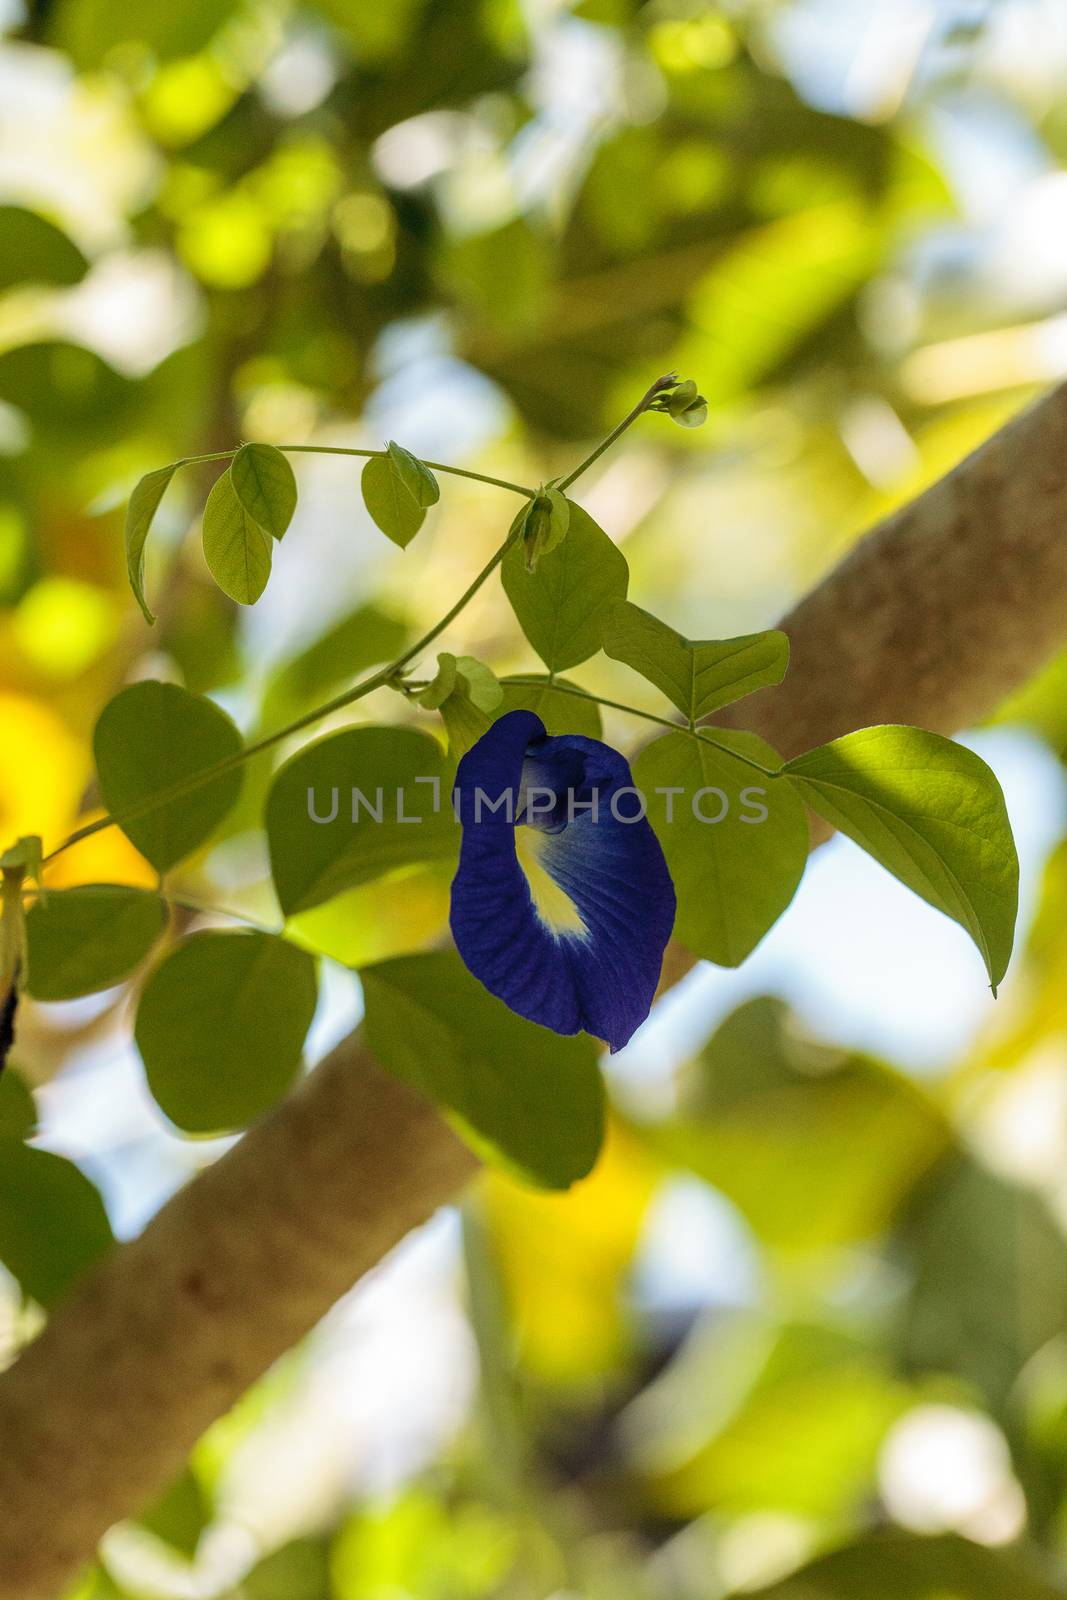 Blue flowers of Krishna’s butter cup Ficus benghalensis var. krishnae blooms on a tree in Naples, Florida